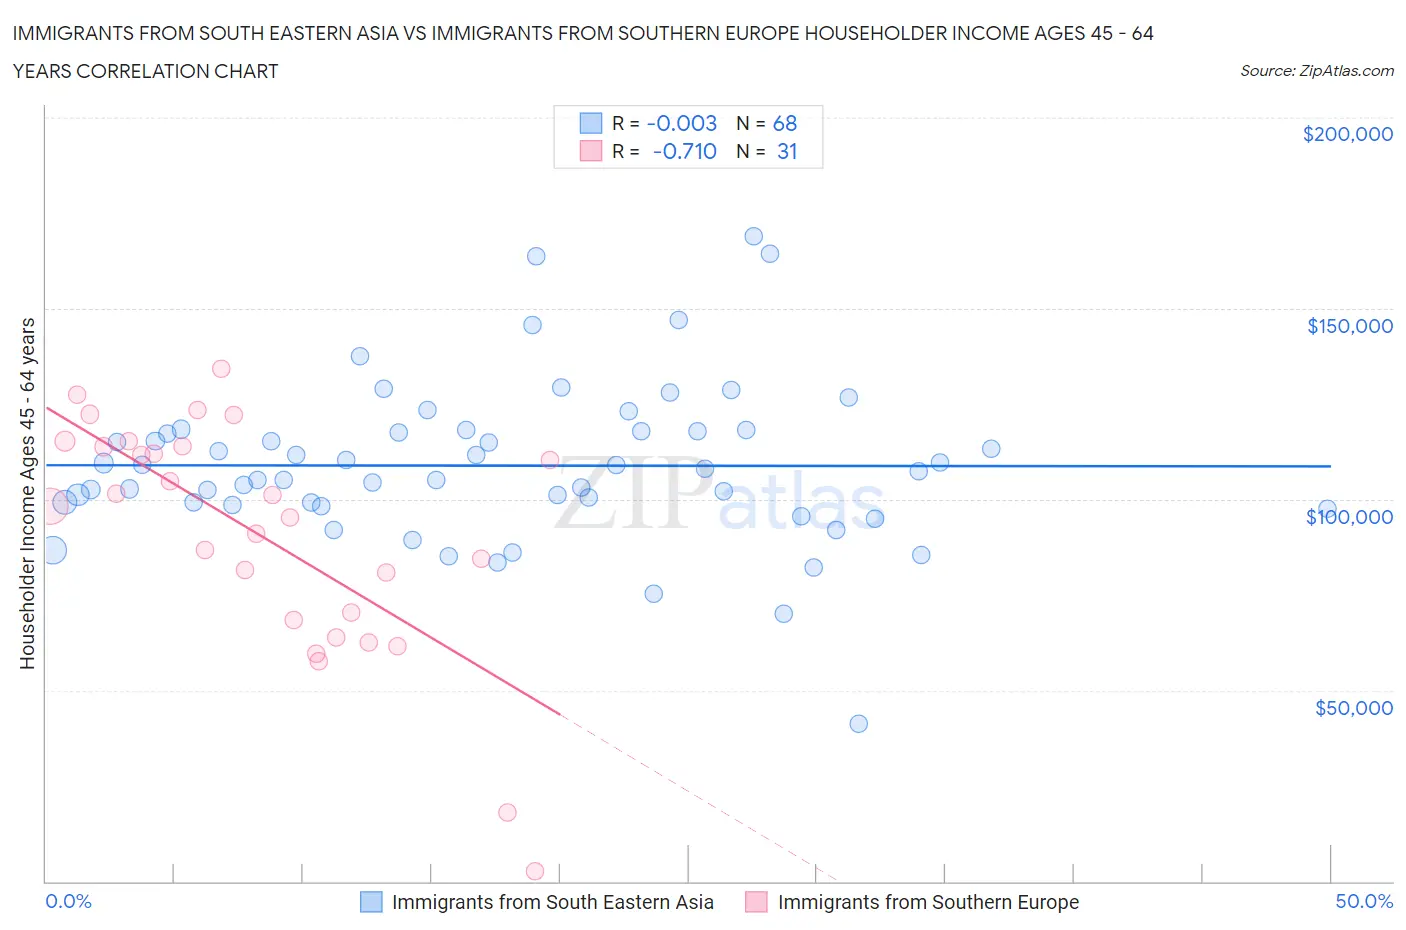 Immigrants from South Eastern Asia vs Immigrants from Southern Europe Householder Income Ages 45 - 64 years